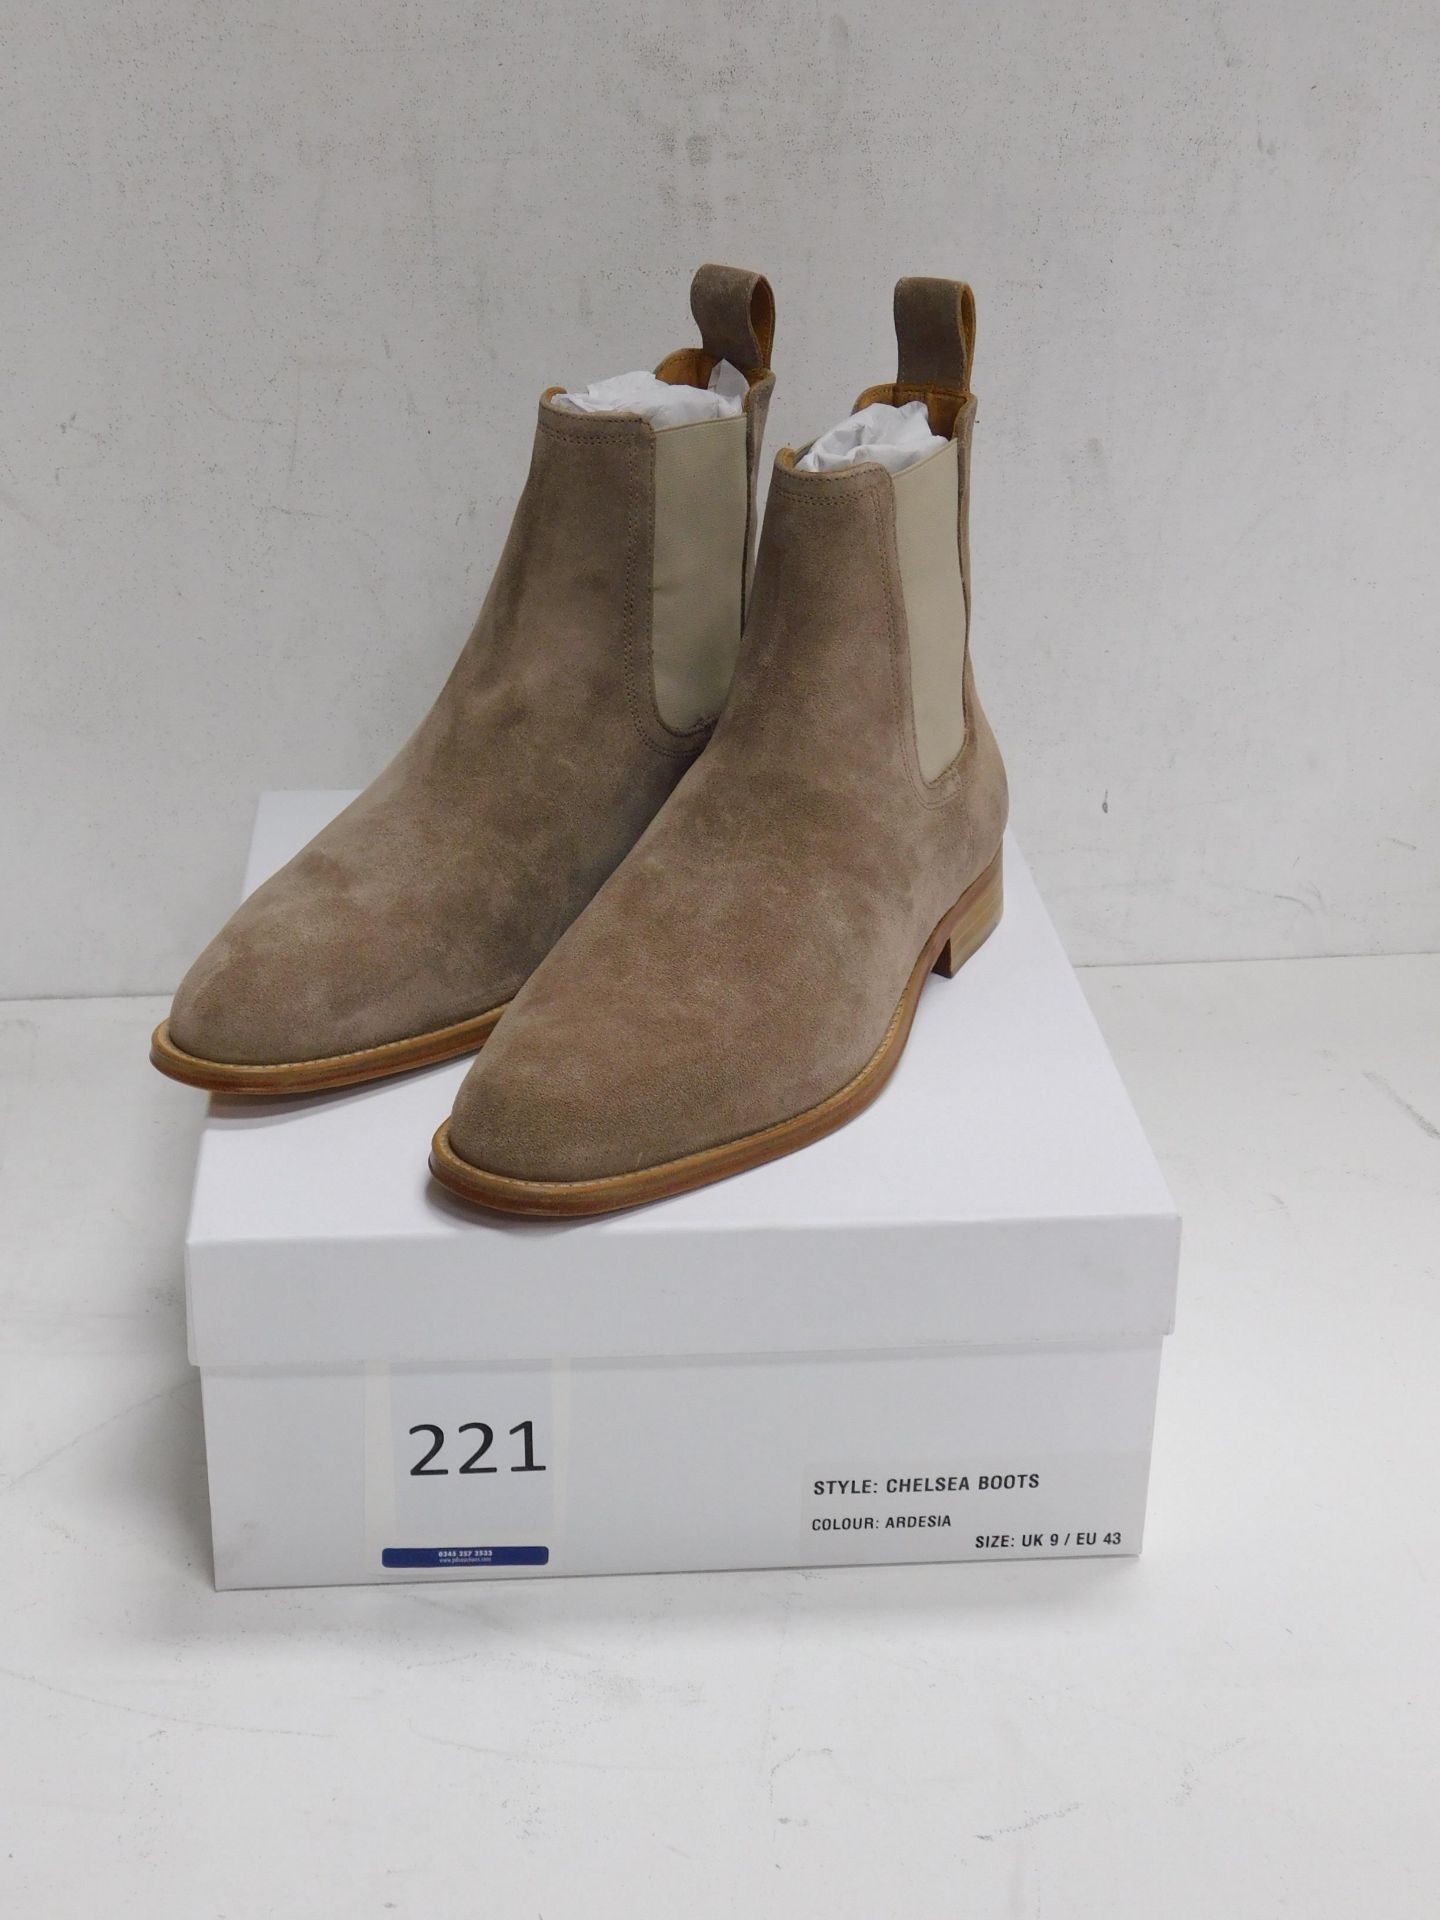 Pair of Ardent “Ardesia” Chelsea Boots, Size 9 (Located: Brentwood. Please Refer to General Notes)